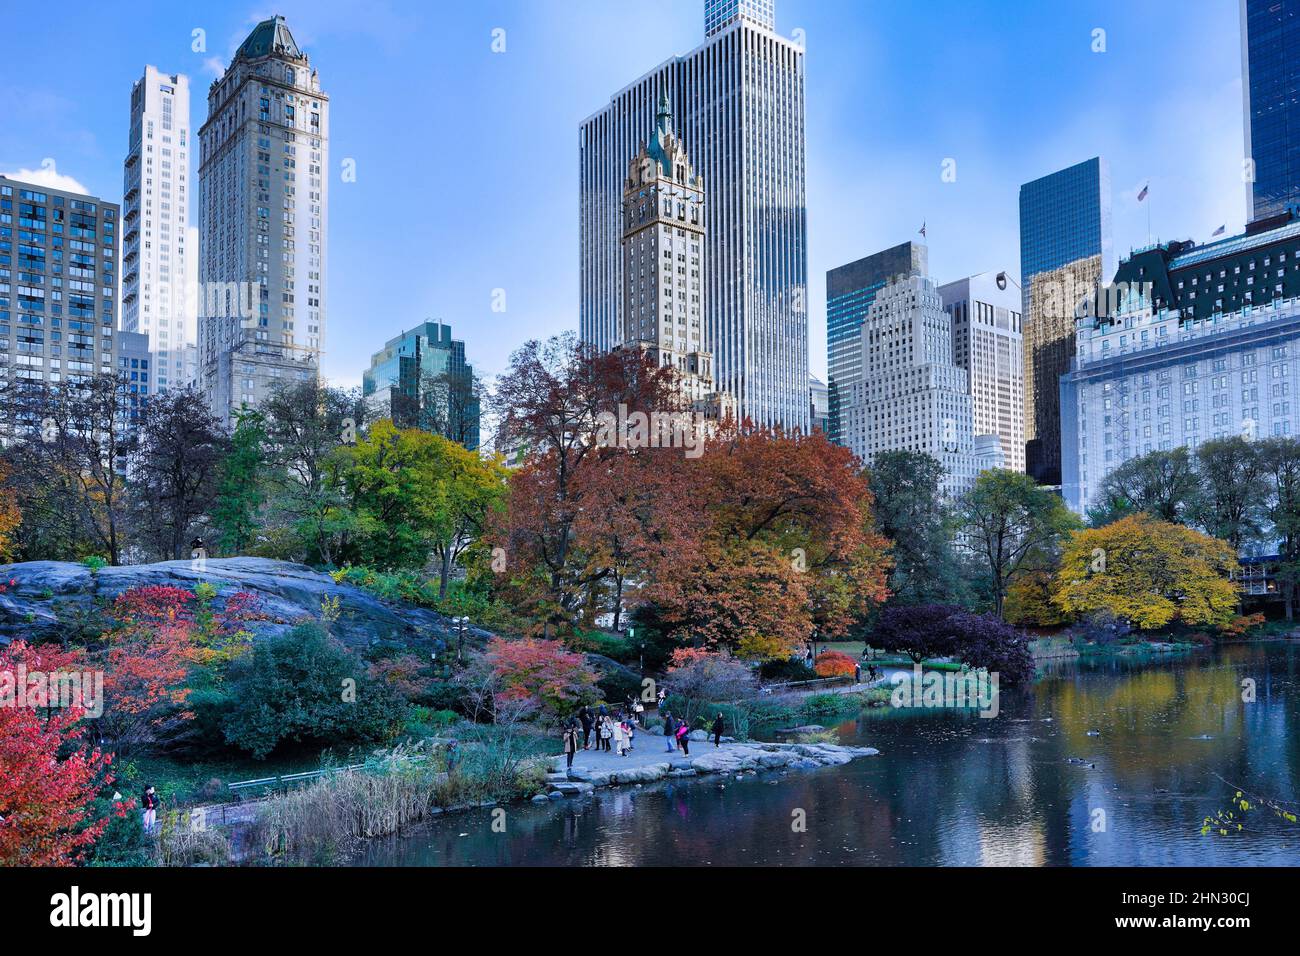 New York Central Park, the Pond at the corner of 5th Avenue and 59th street, with fall colors on trees Stock Photo